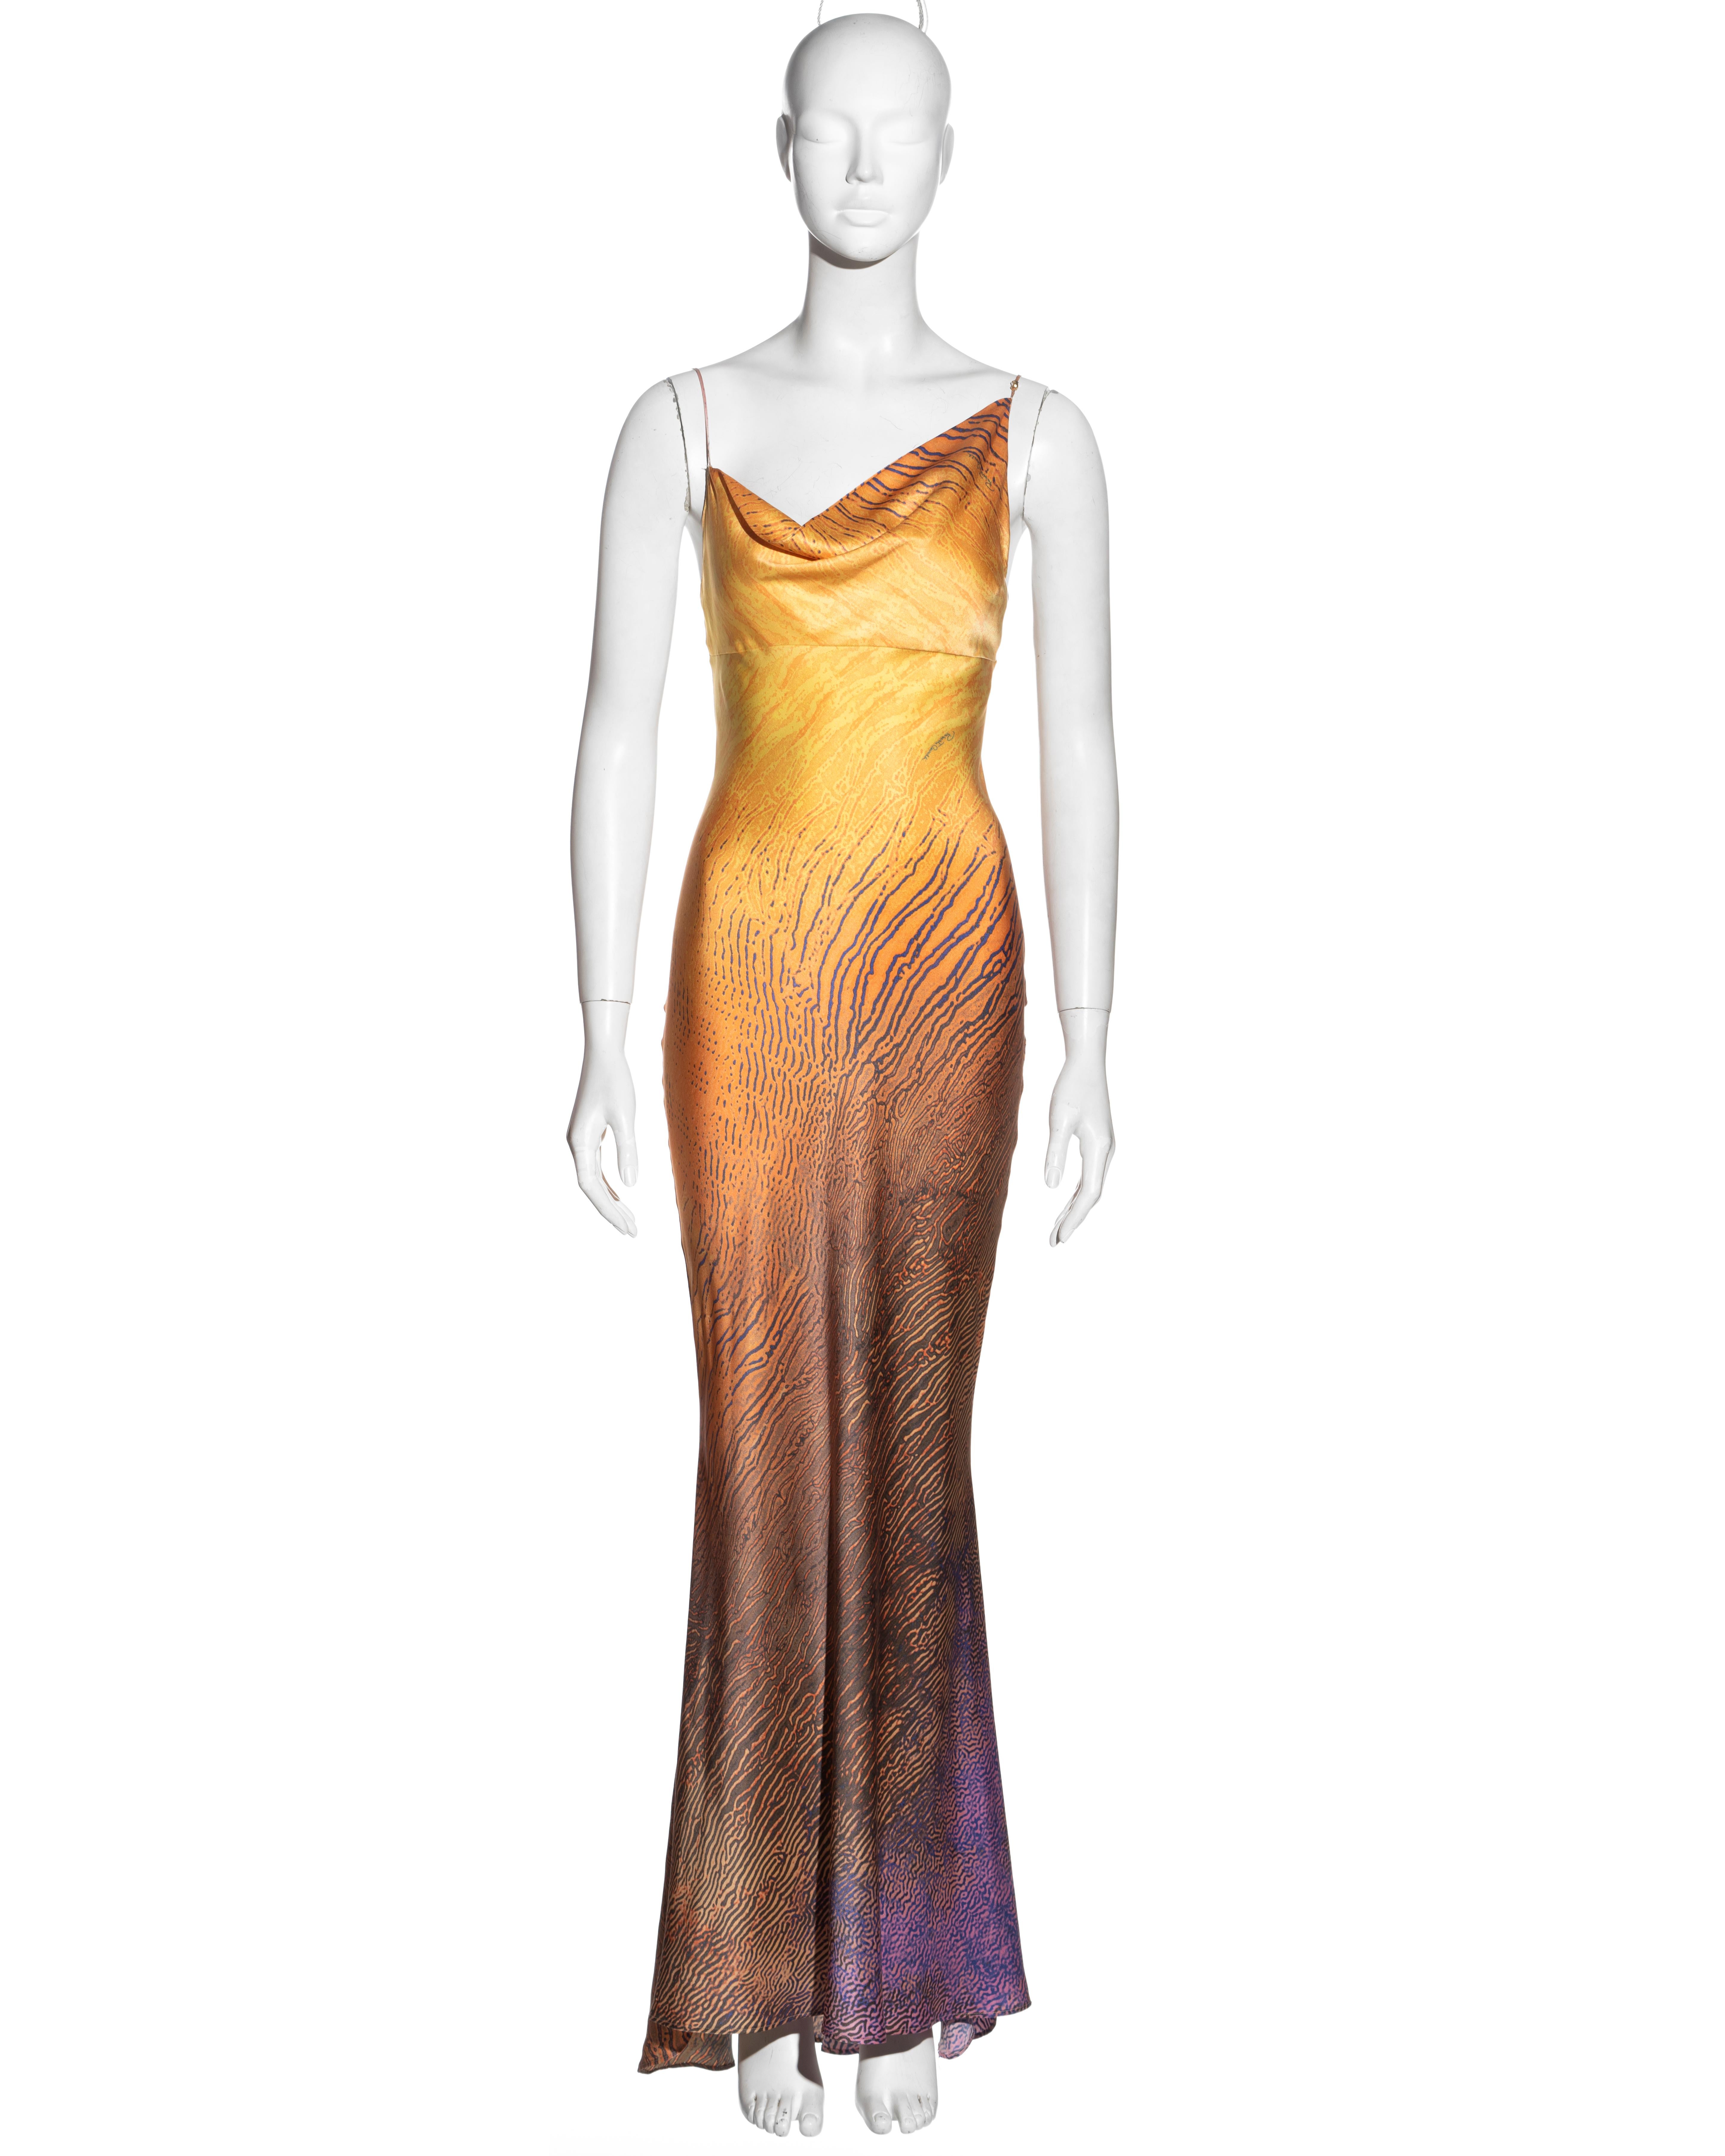 ▪ Roberto Cavalli bias cut evening dress
▪ Multicoloured sunset silk with printed graphic overlay 
▪ Asymmetric cowl neck 
▪ Spaghetti straps 
▪ Floor-length skirt 
▪ Size Small
▪ Spring-Summer 2001
▪ 100% Silk
▪ Made in Italy